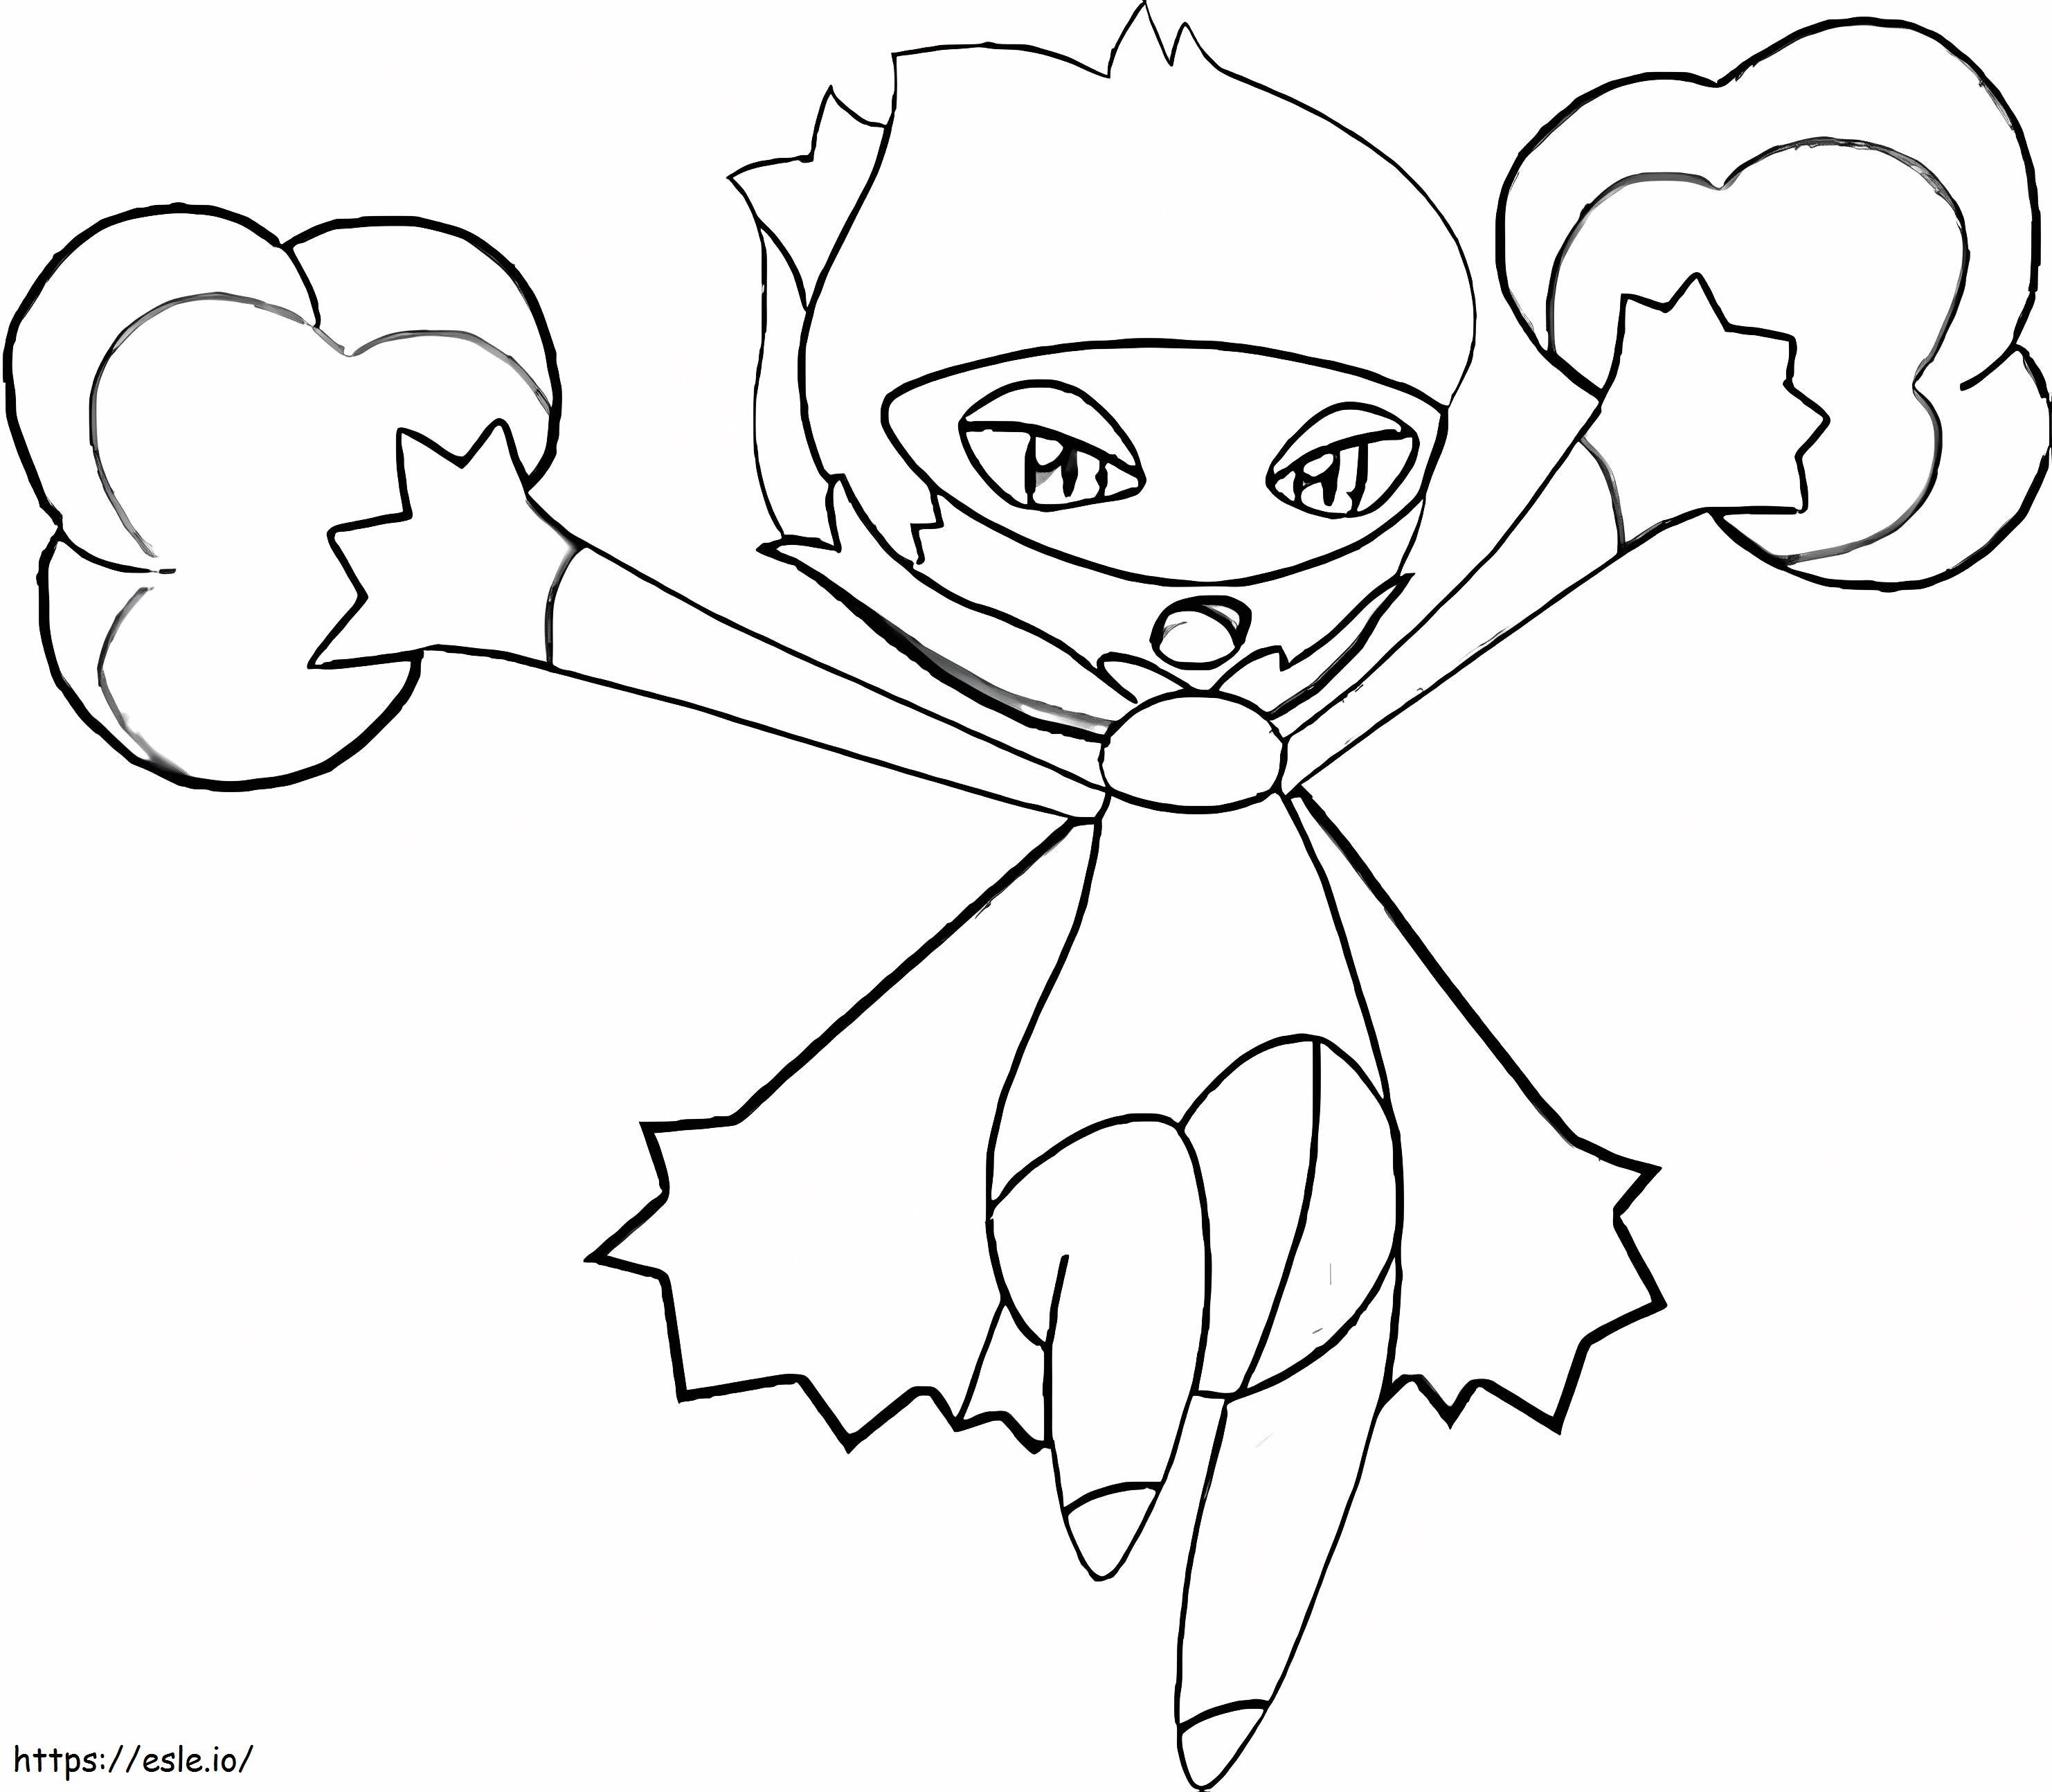 Rose Rose 1 coloring page